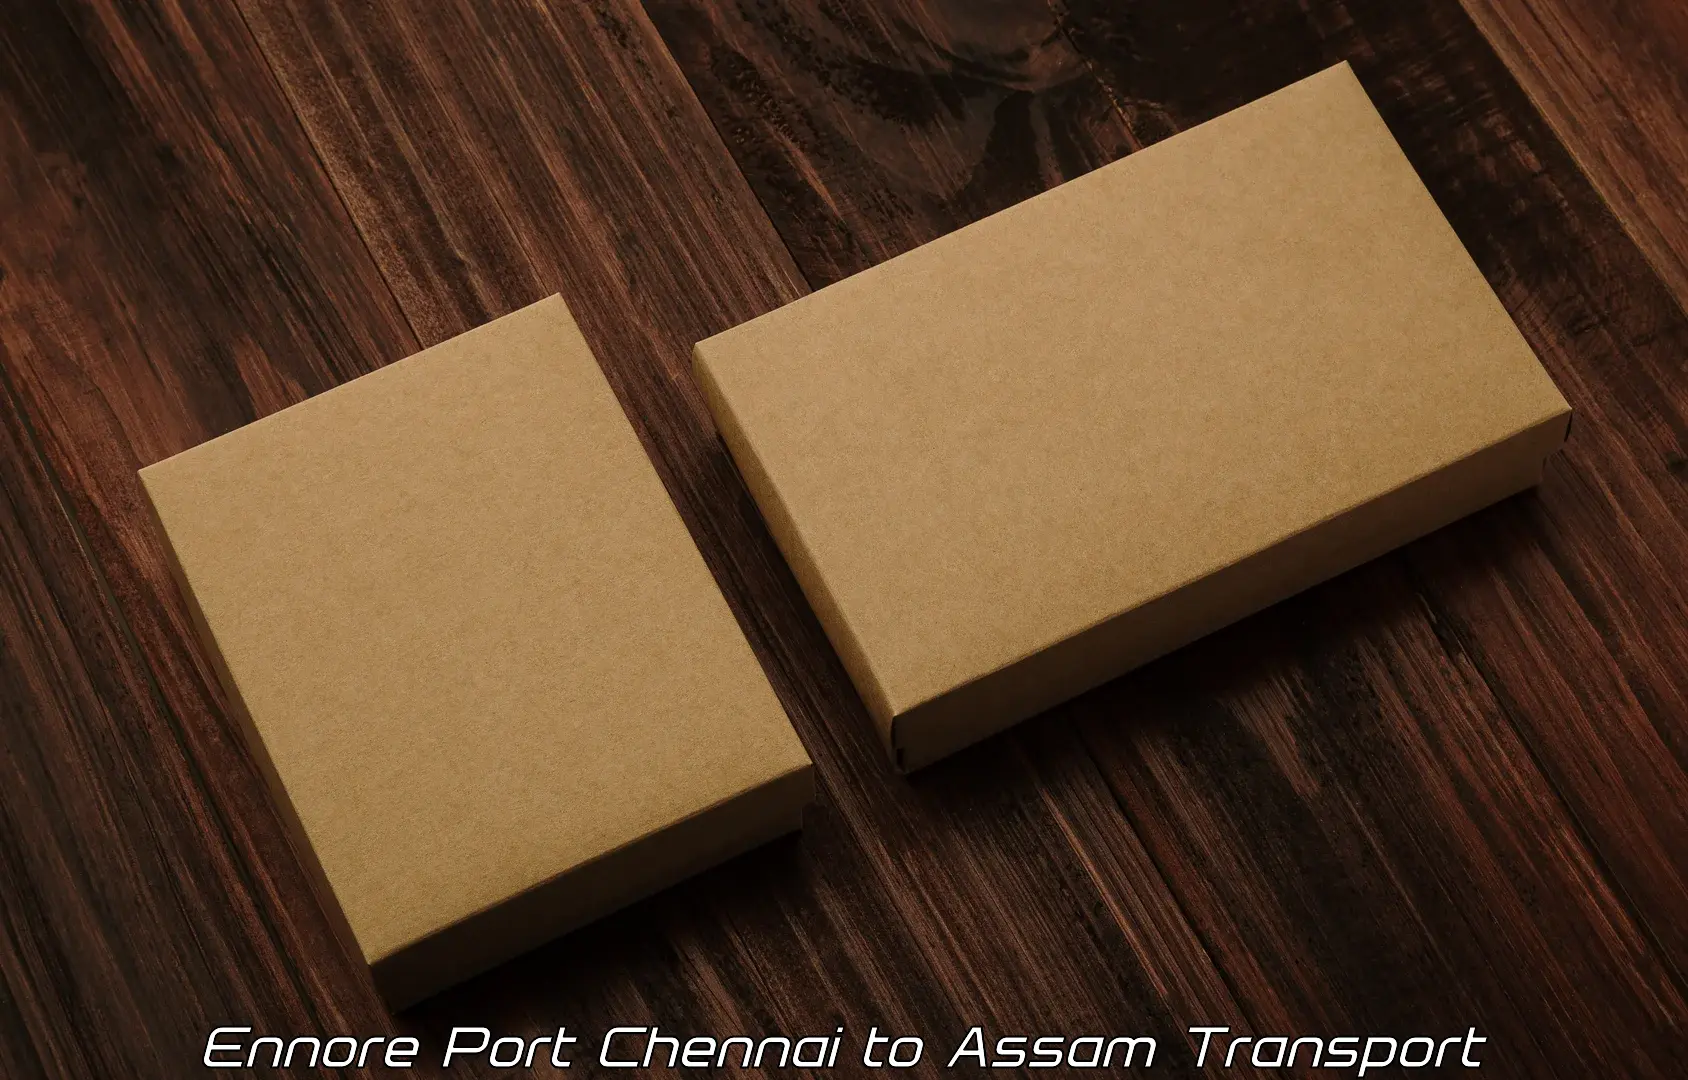 Goods delivery service Ennore Port Chennai to Goalpara